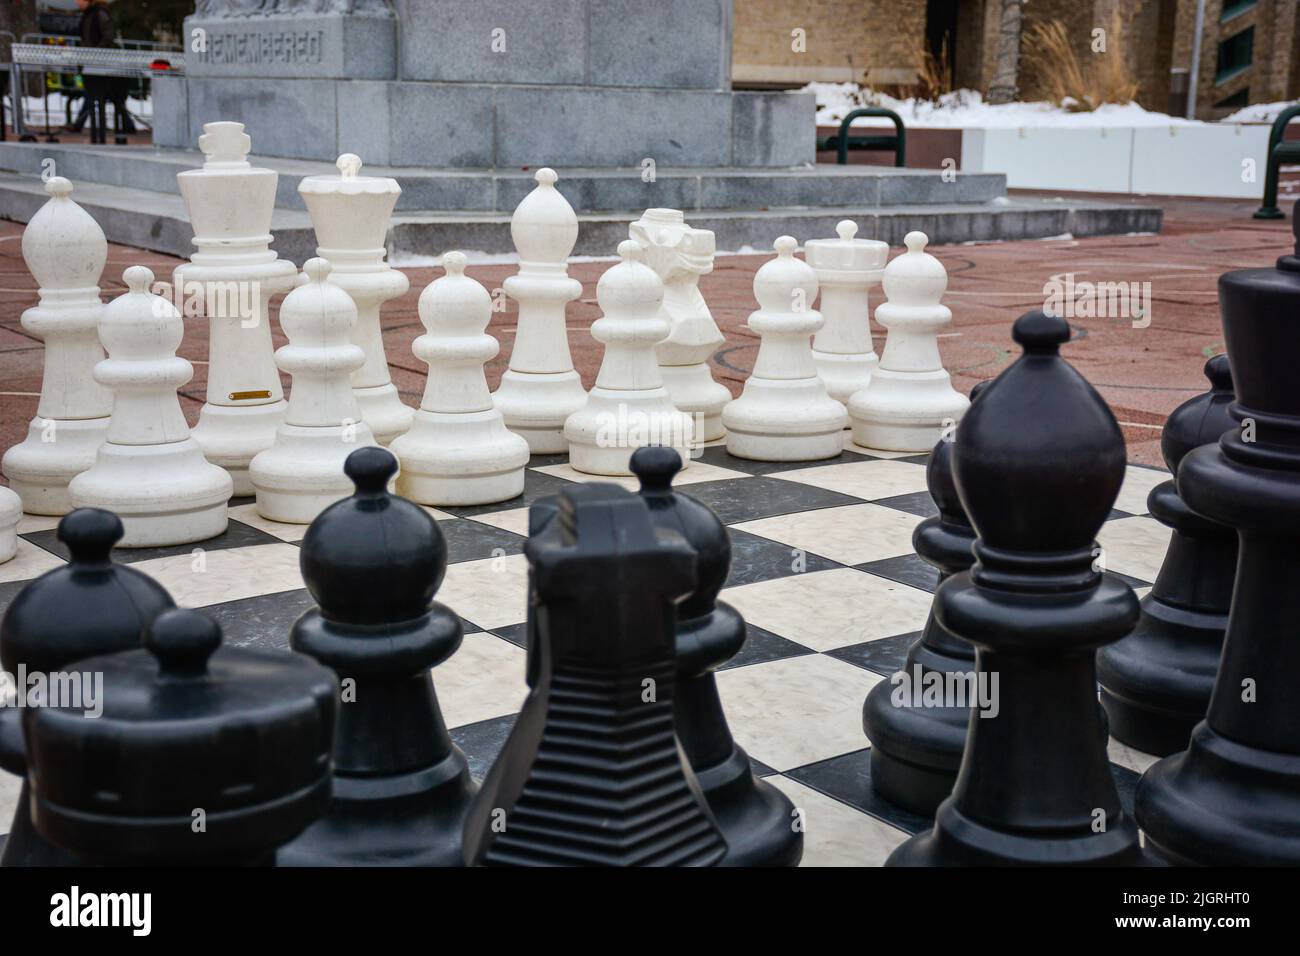 Big street chess pieces stock image. Image of large - 191891493